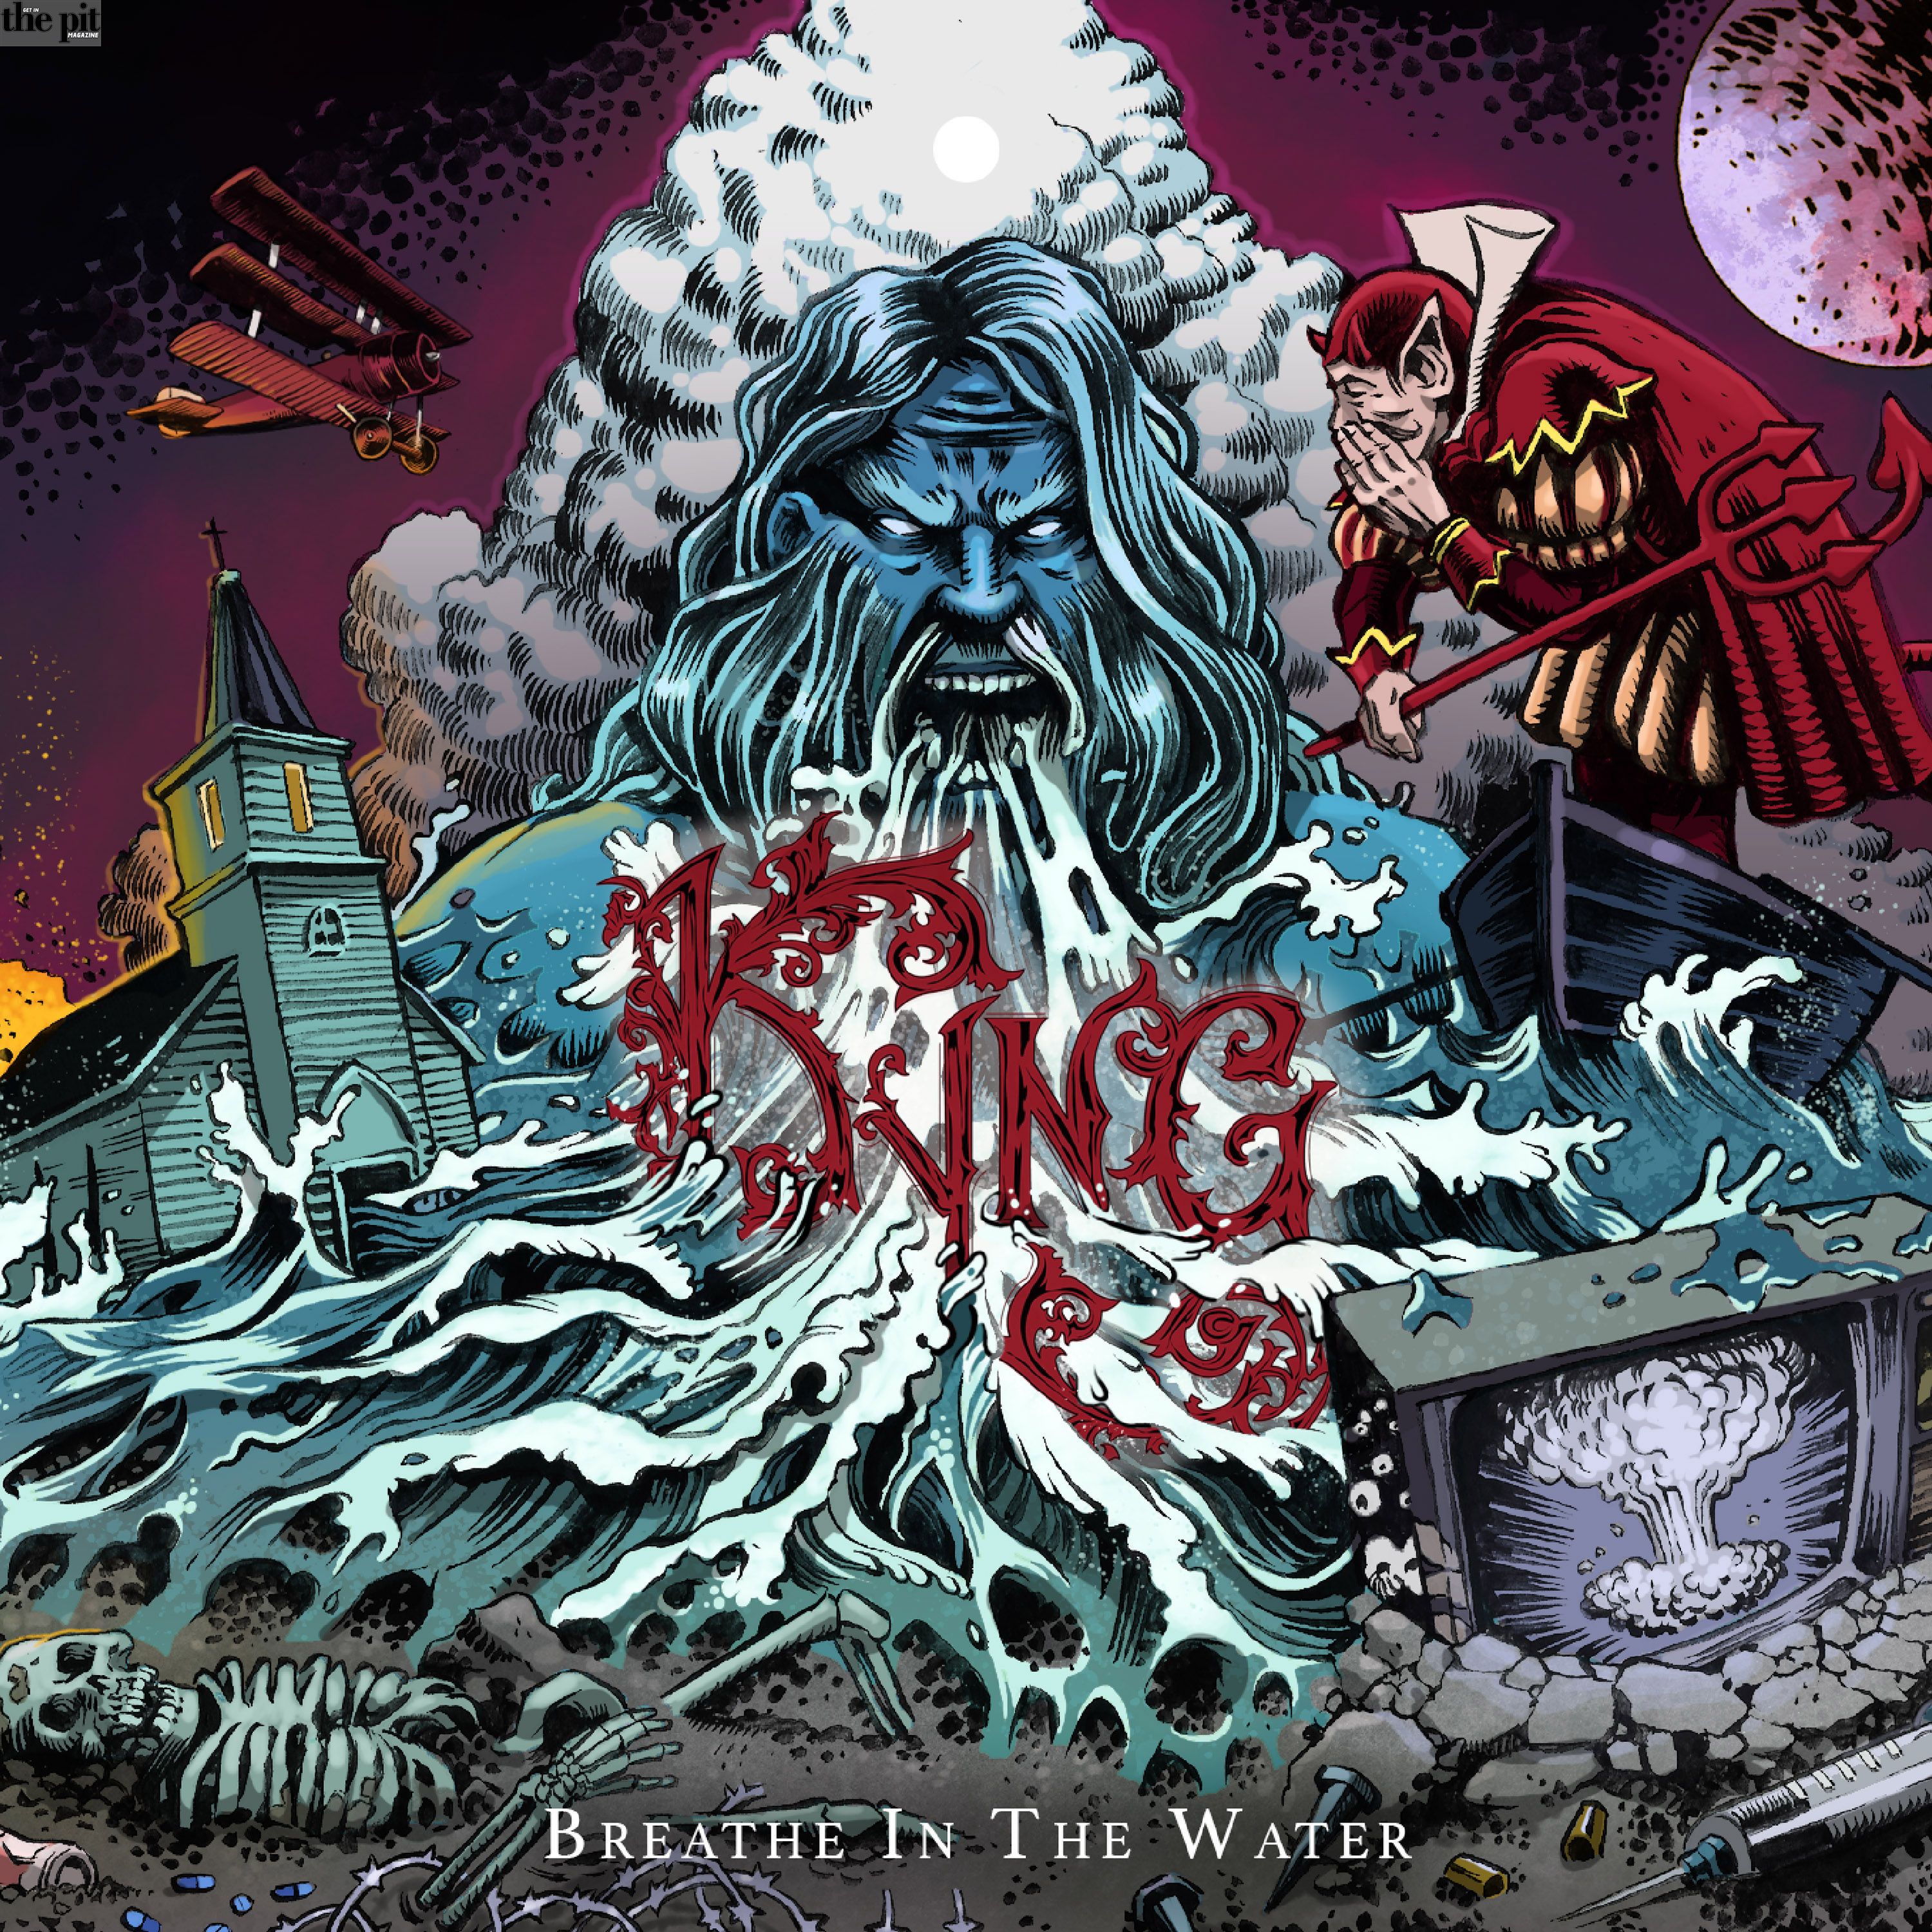 The Pit Magazine, Kyng, Breathe in the Water, Pristine Warning, Razor and Tie